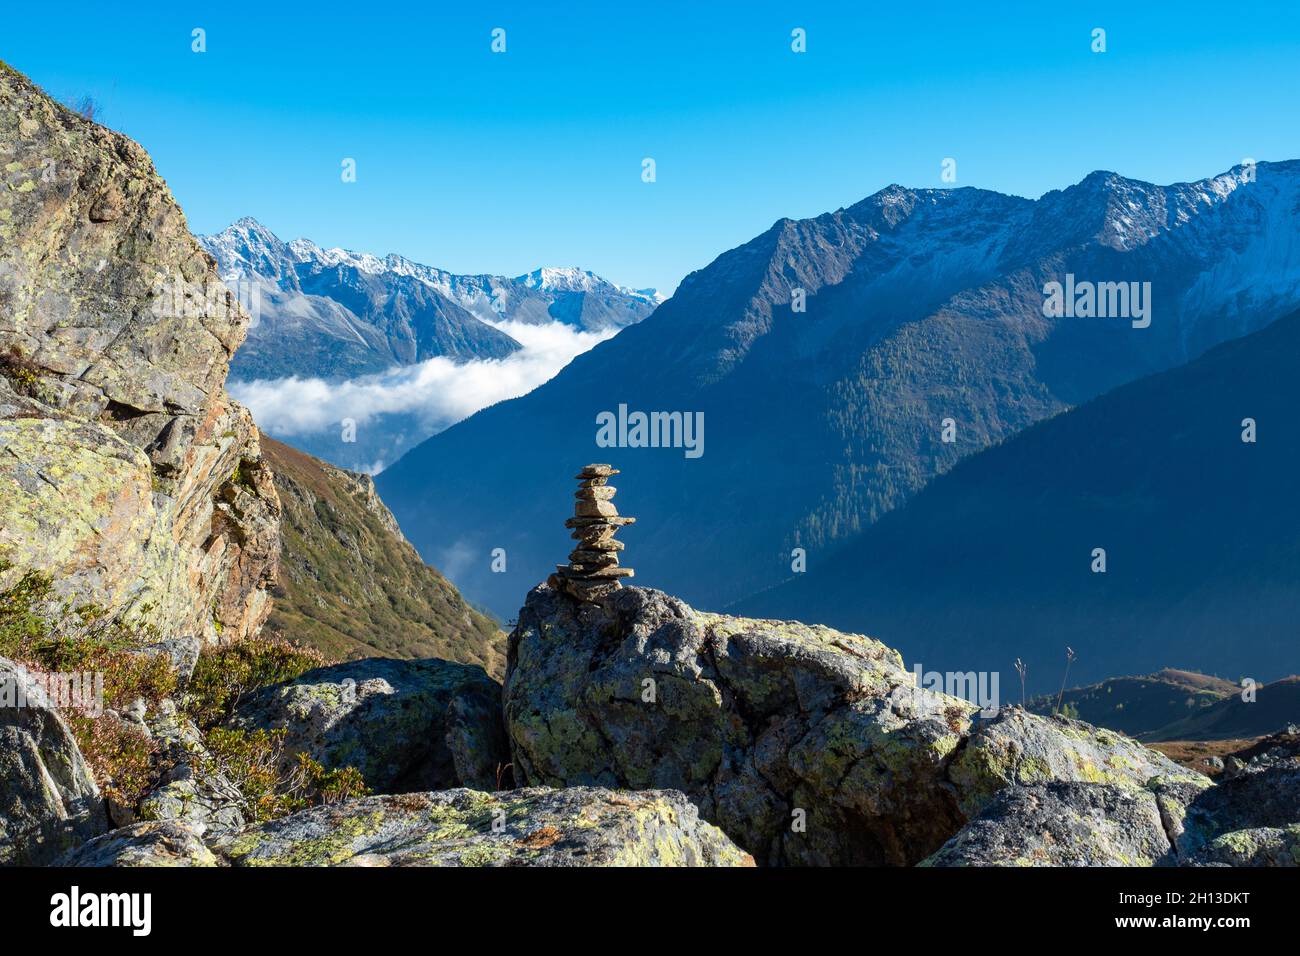 Hiking in Central Switzerland. A cairn marking a footpath, high mountains in the background Stock Photo